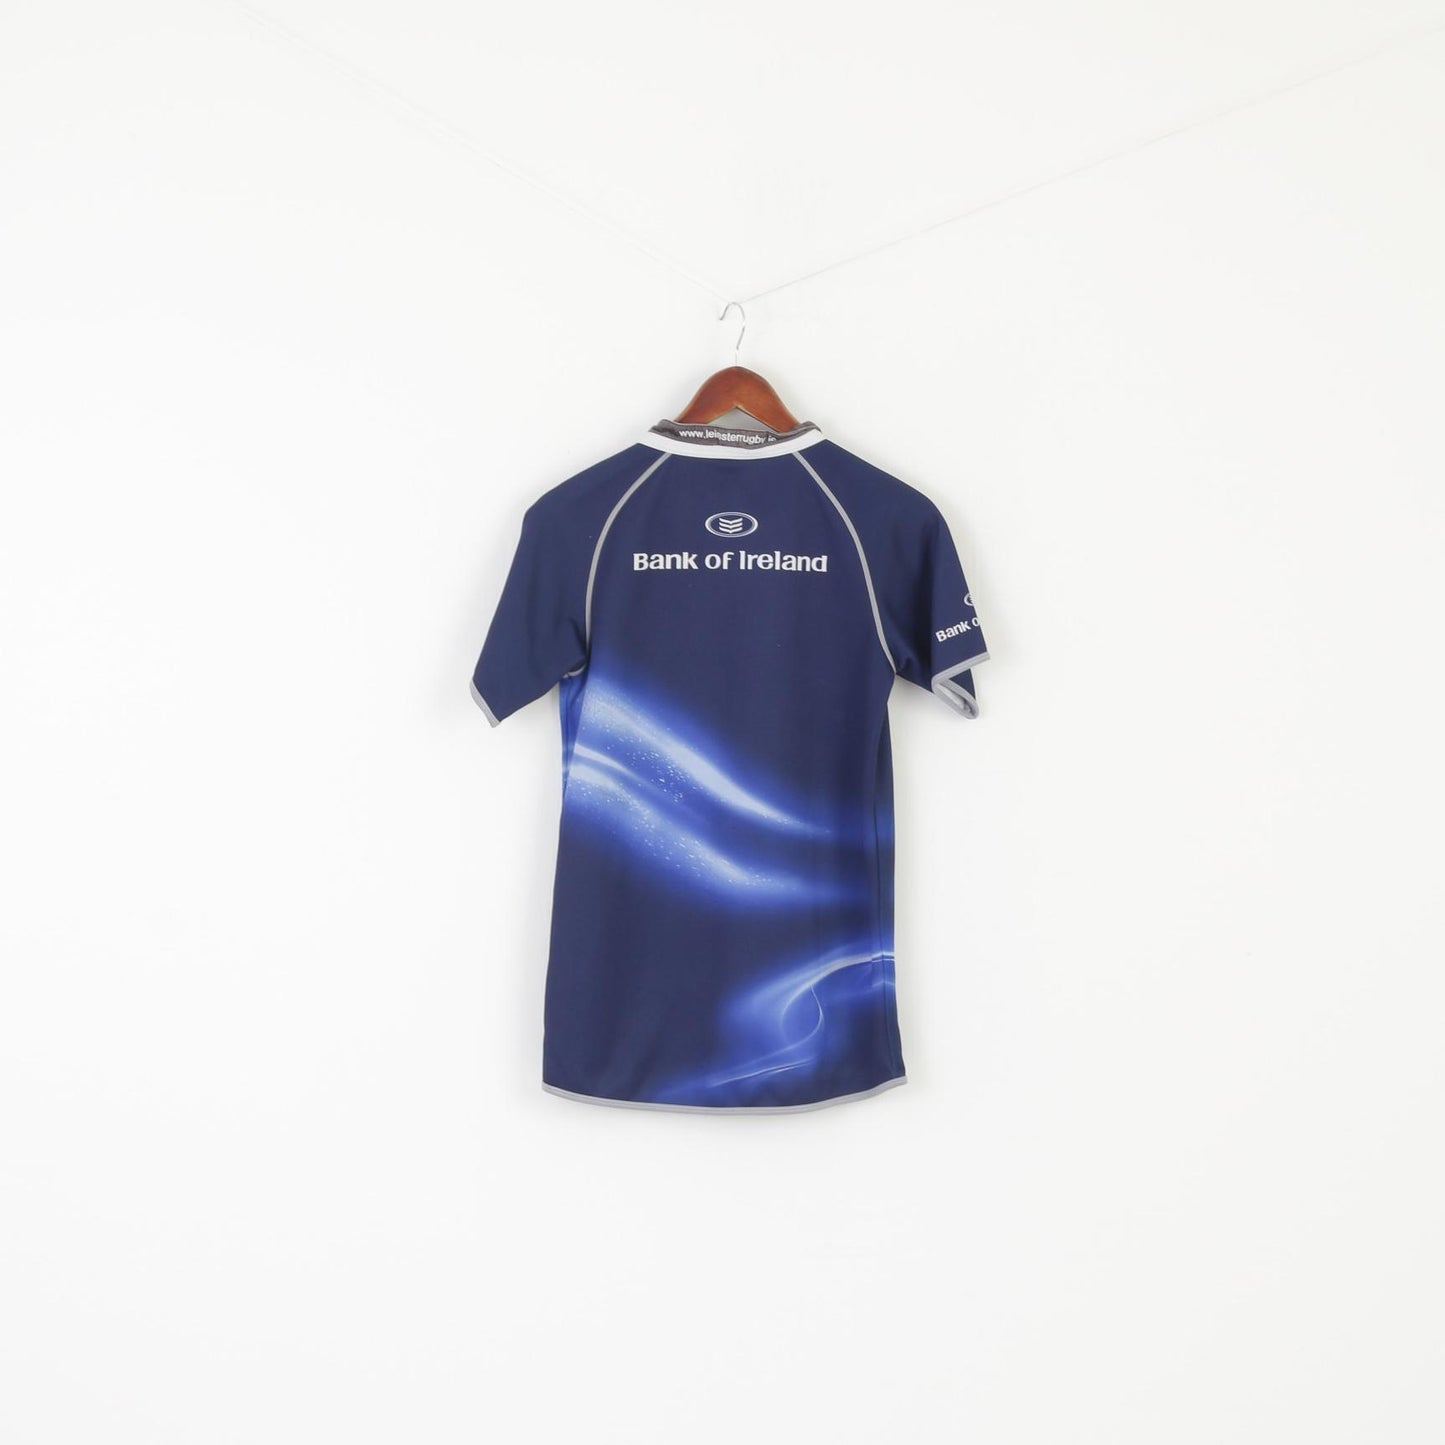 Canterbury of New Zealand Garçons 14 Âge Chemise Marine Leinster Rugby Jersey Vintage Top